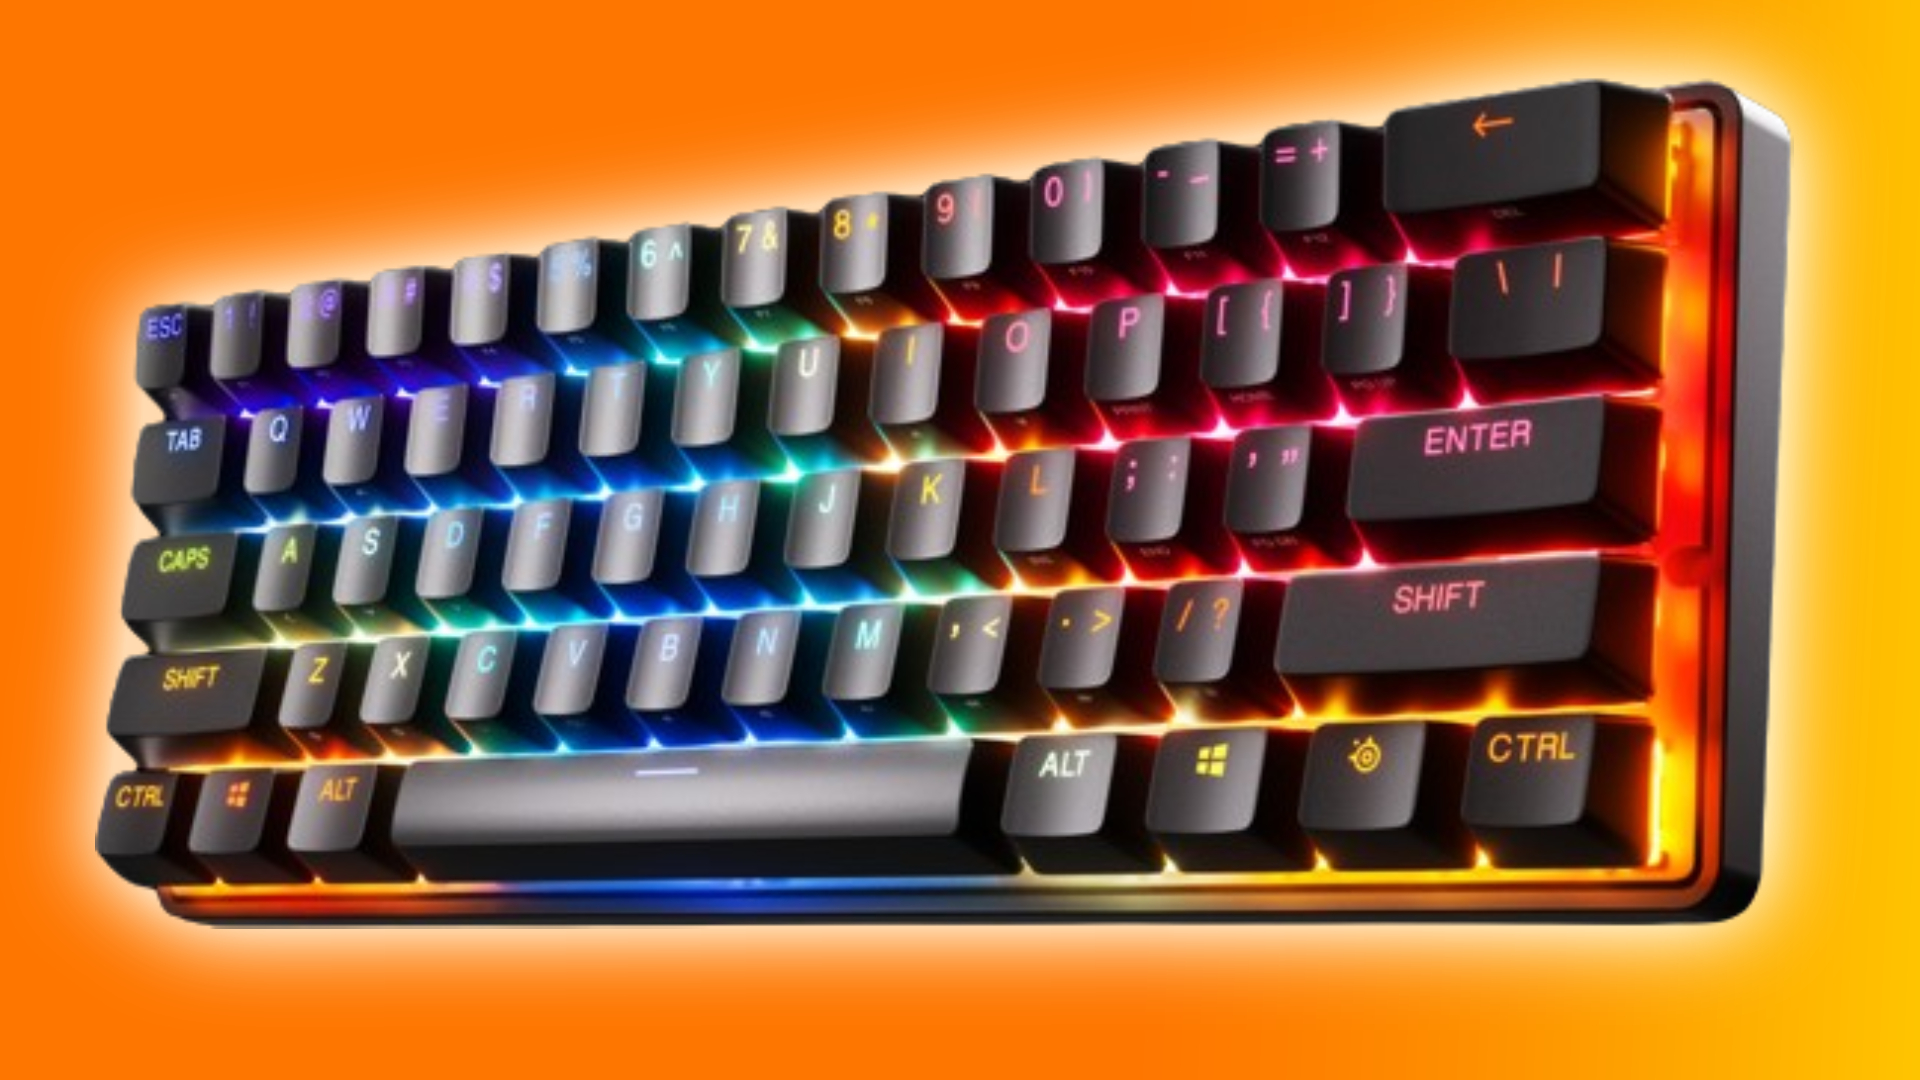 https://www.pcgamesn.com/wp-content/sites/pcgamesn/2023/11/steelseries-apex-pro-mini-gaming-keyboard-cyber-monday-deal-featured.jpg